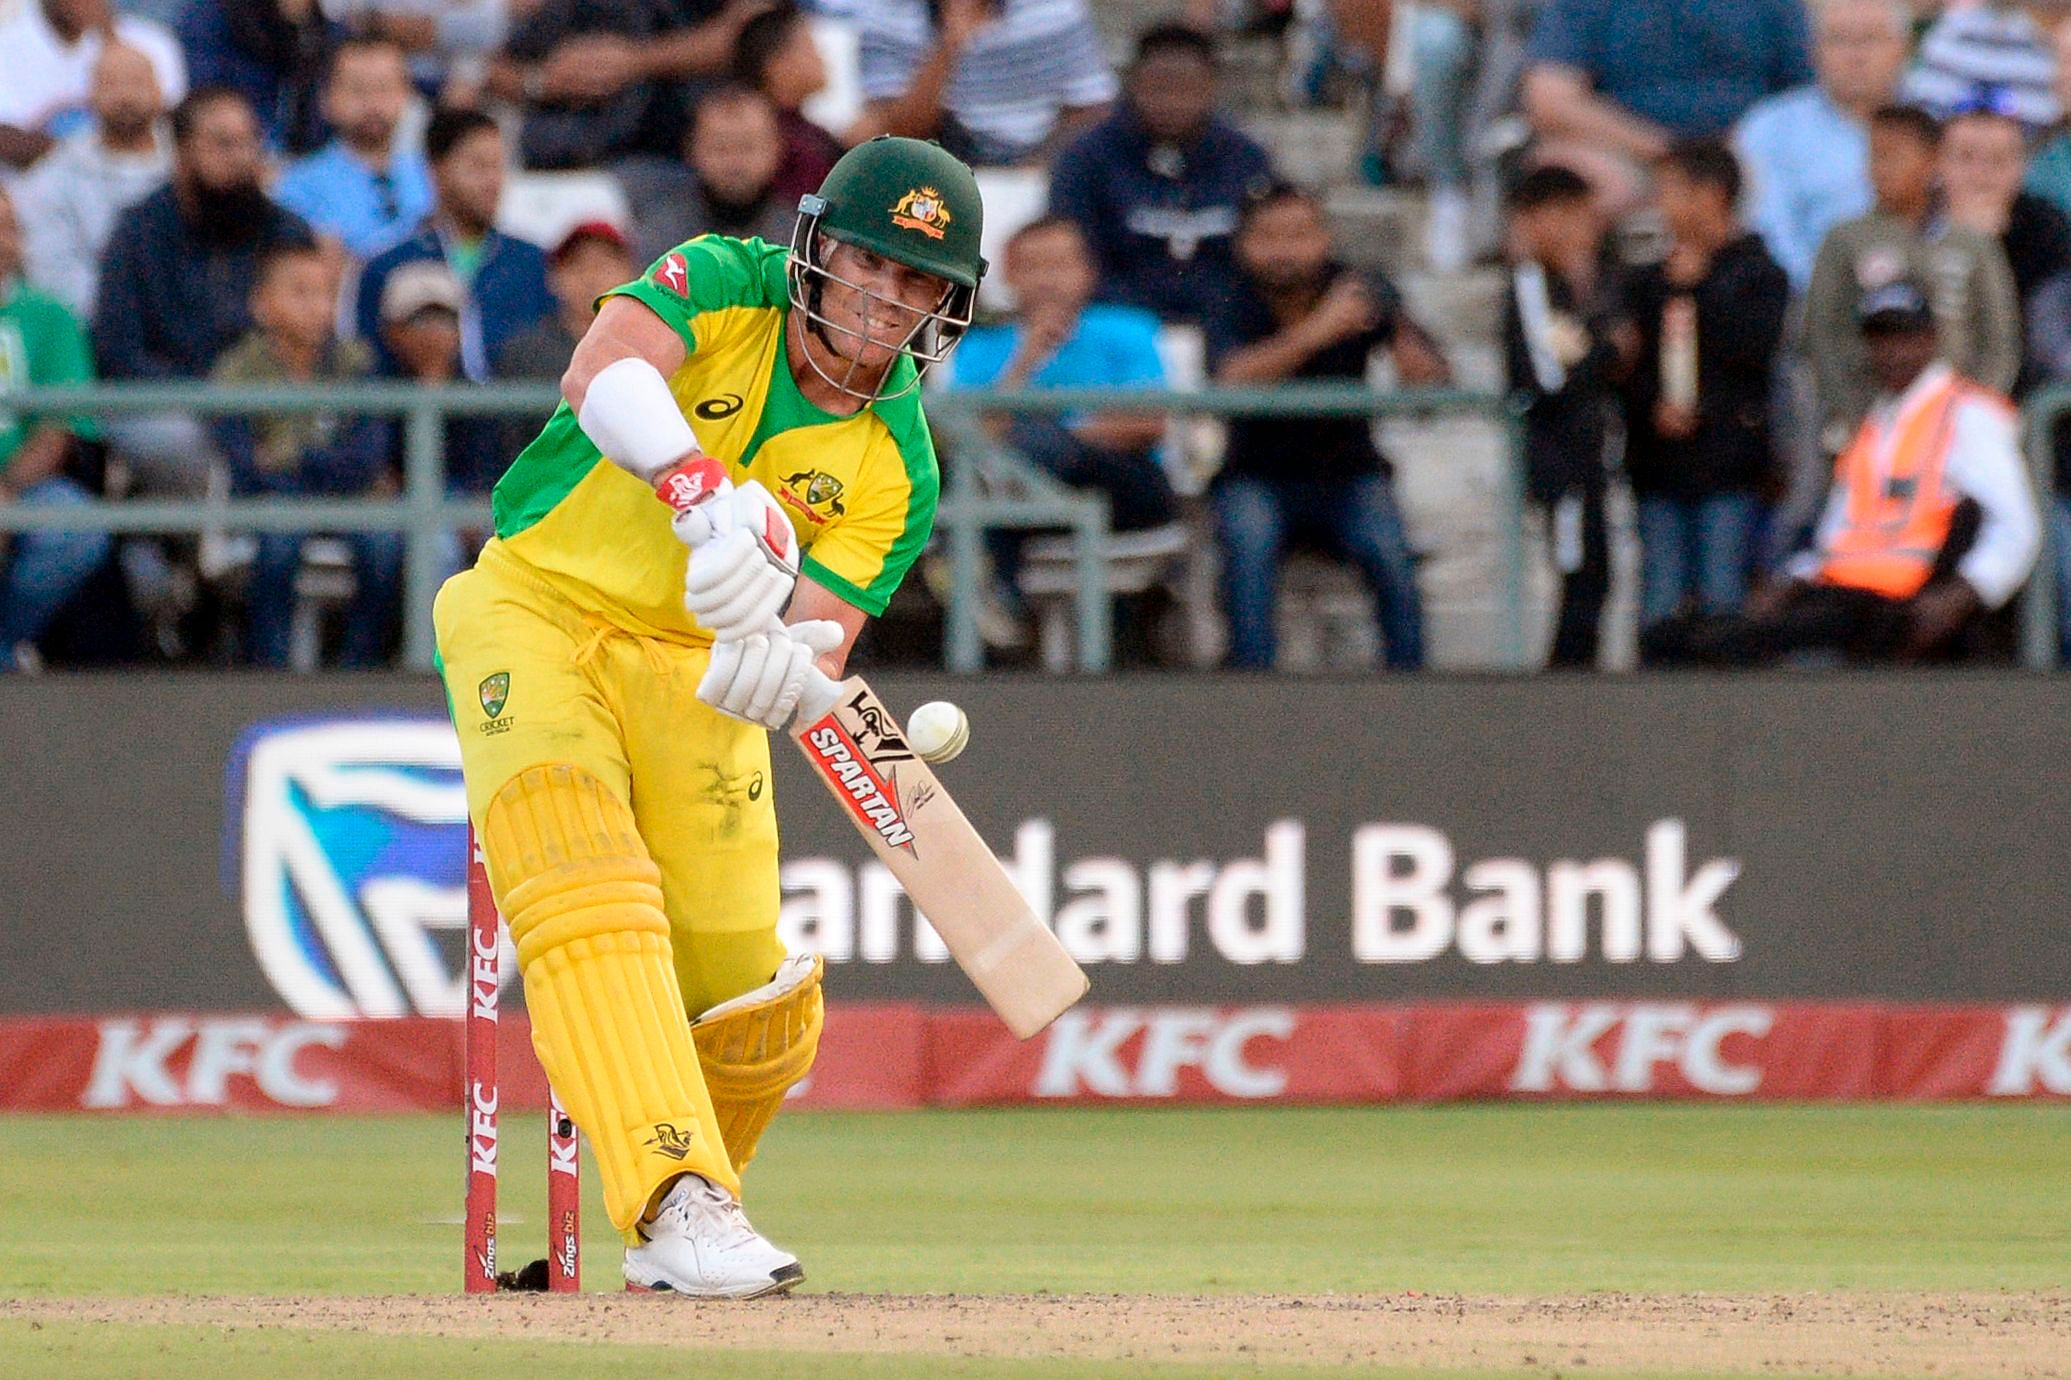 Australia's David Warner bats during the third and final T20 international cricket match between South Africa and Australia at Newlands Cricket Stadium in Cape Town. (AFP Photo)